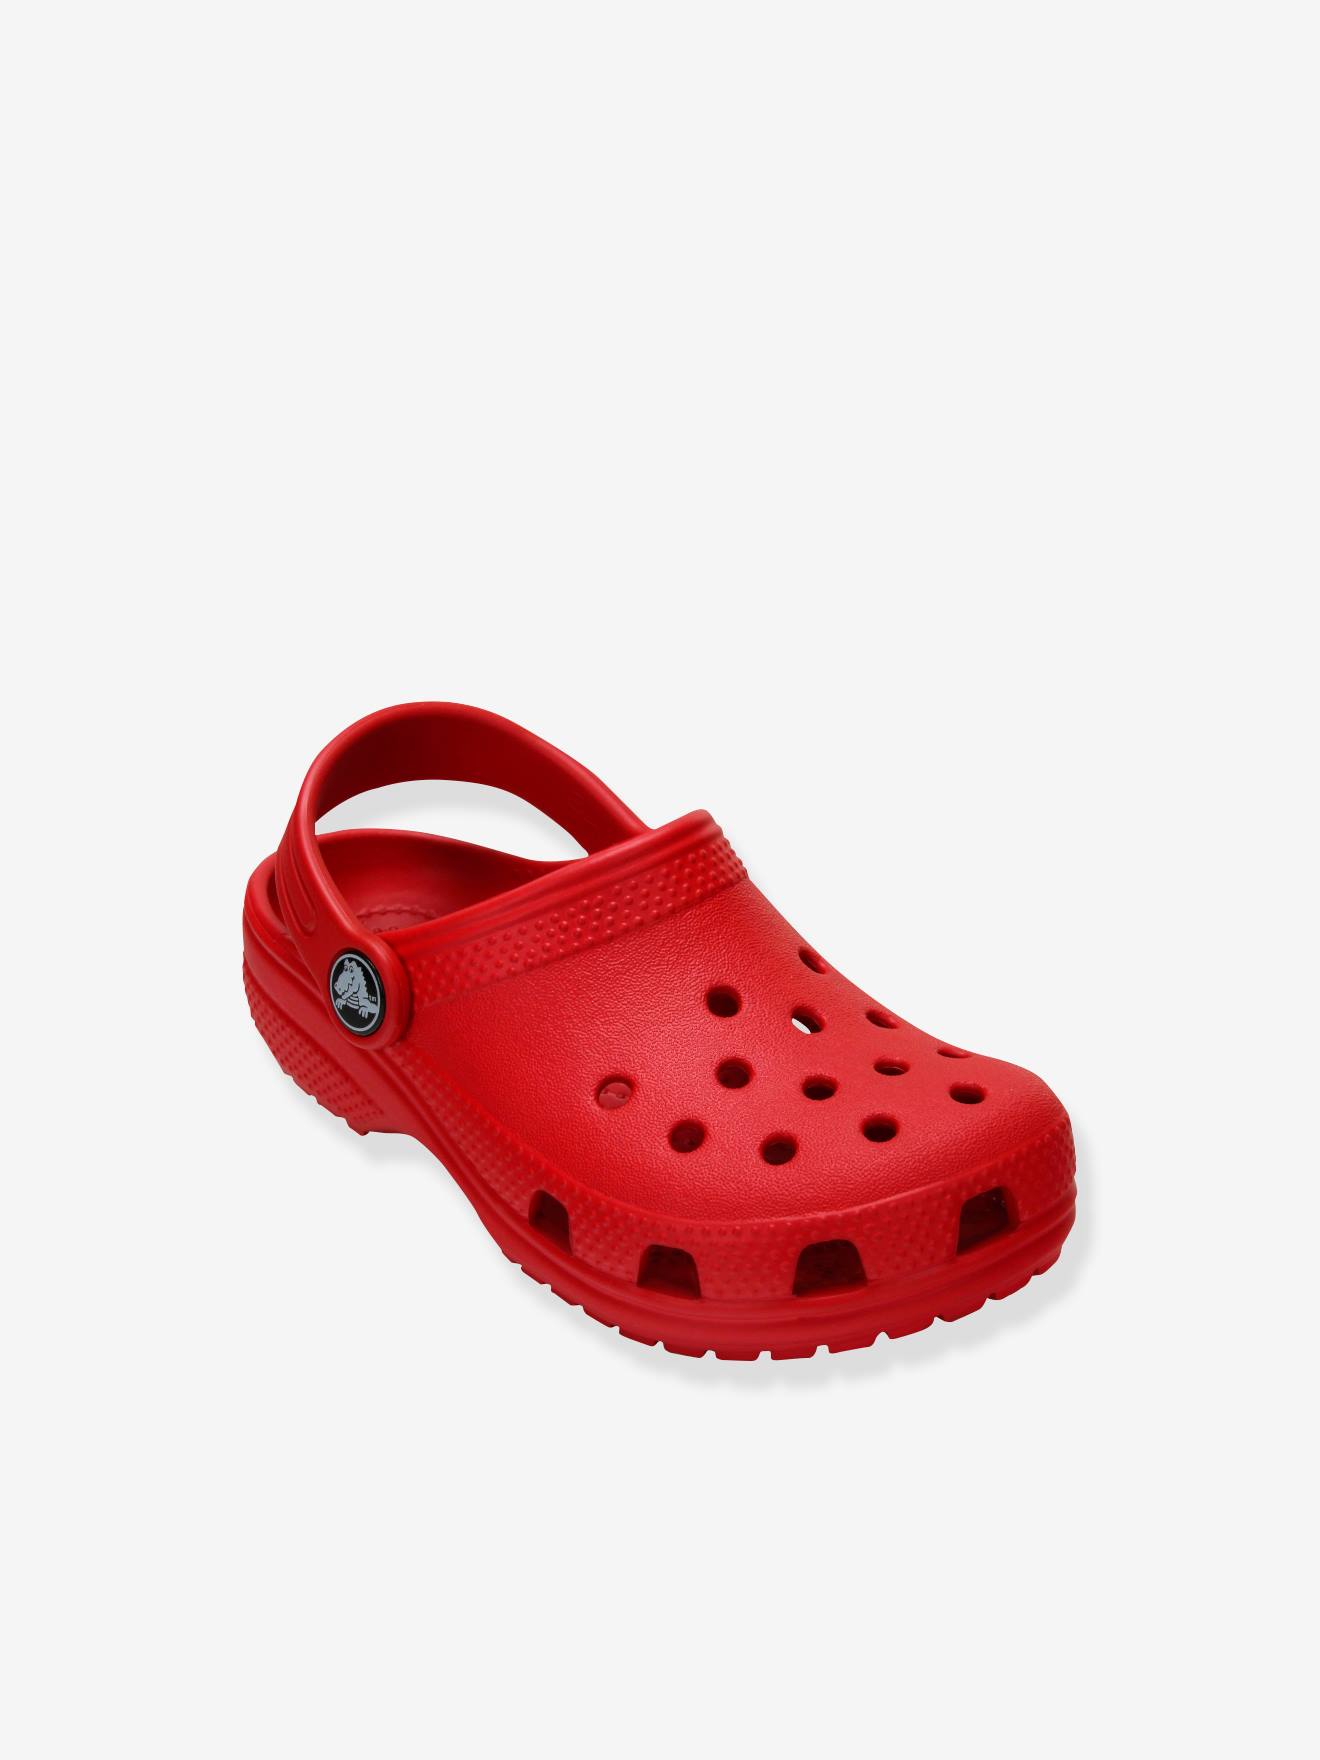 Classic Clog K for Kids, by CROCS(TM) red medium solid